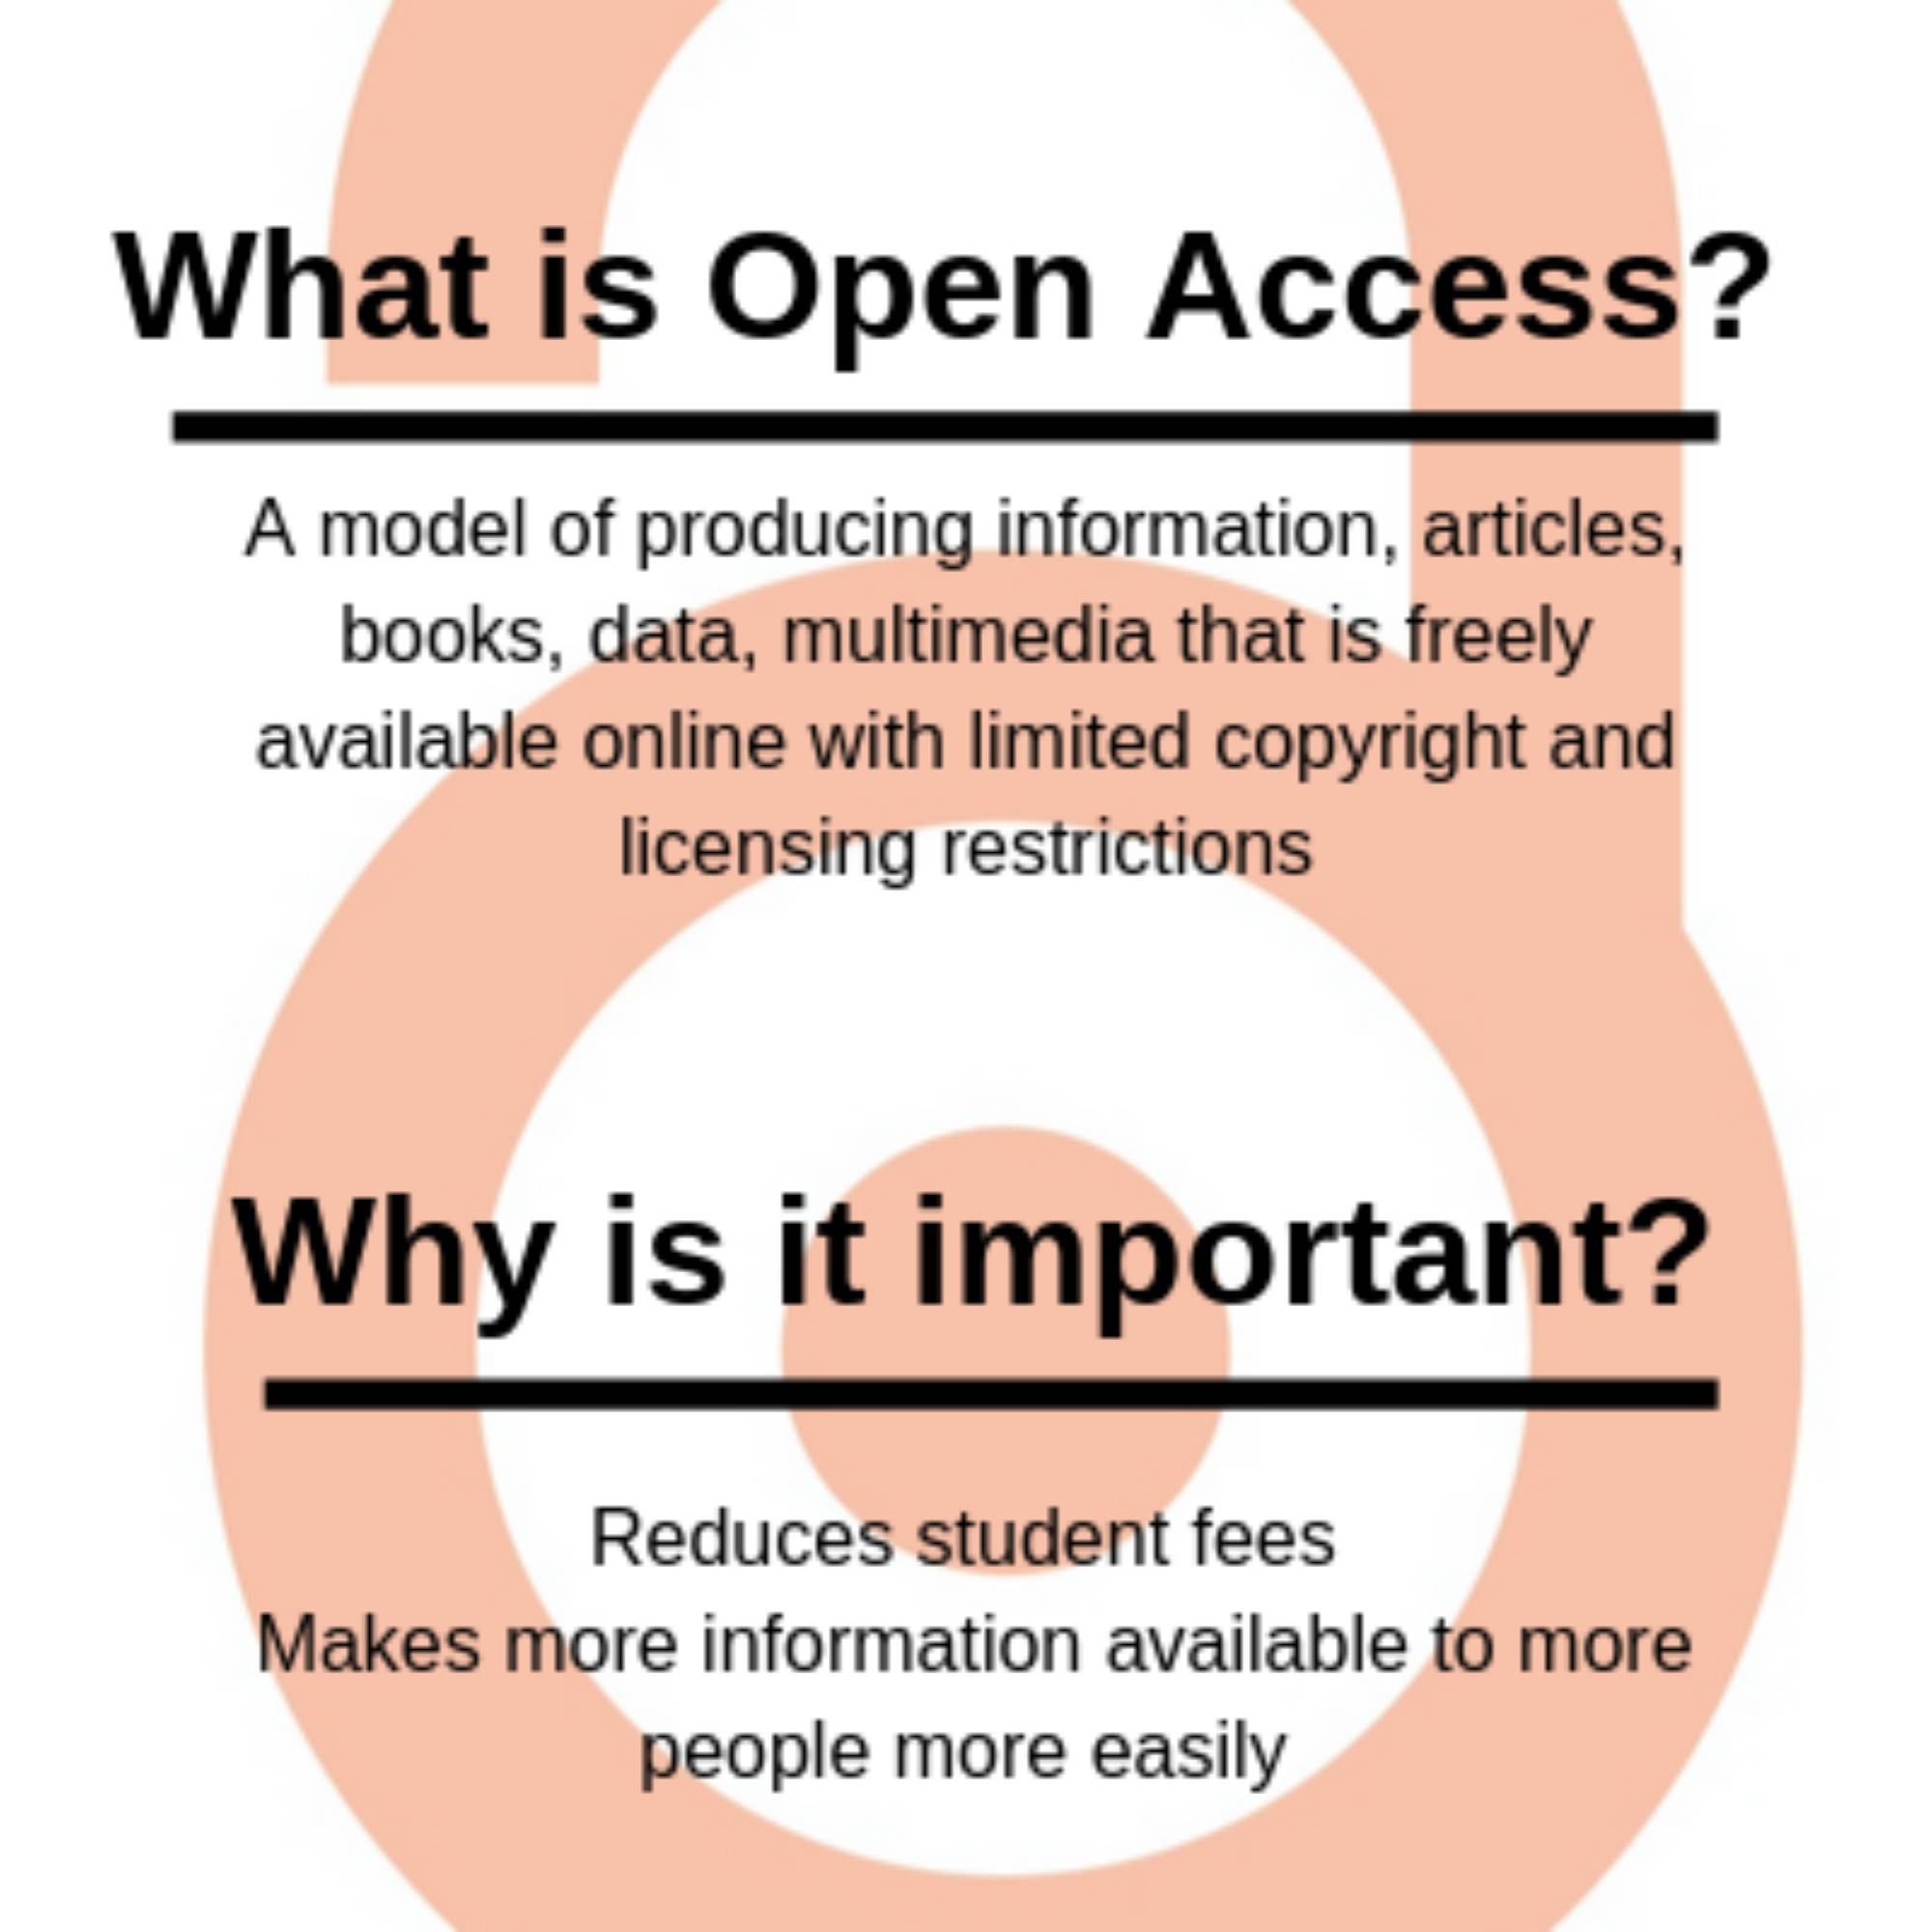 Open Access is important because it allows for information, articles, books, and multimedia to  be freely available online at no charge and with limited copyright and licensing restrictions. It is important because it reduces student fees and makes more information available to more people more easily.